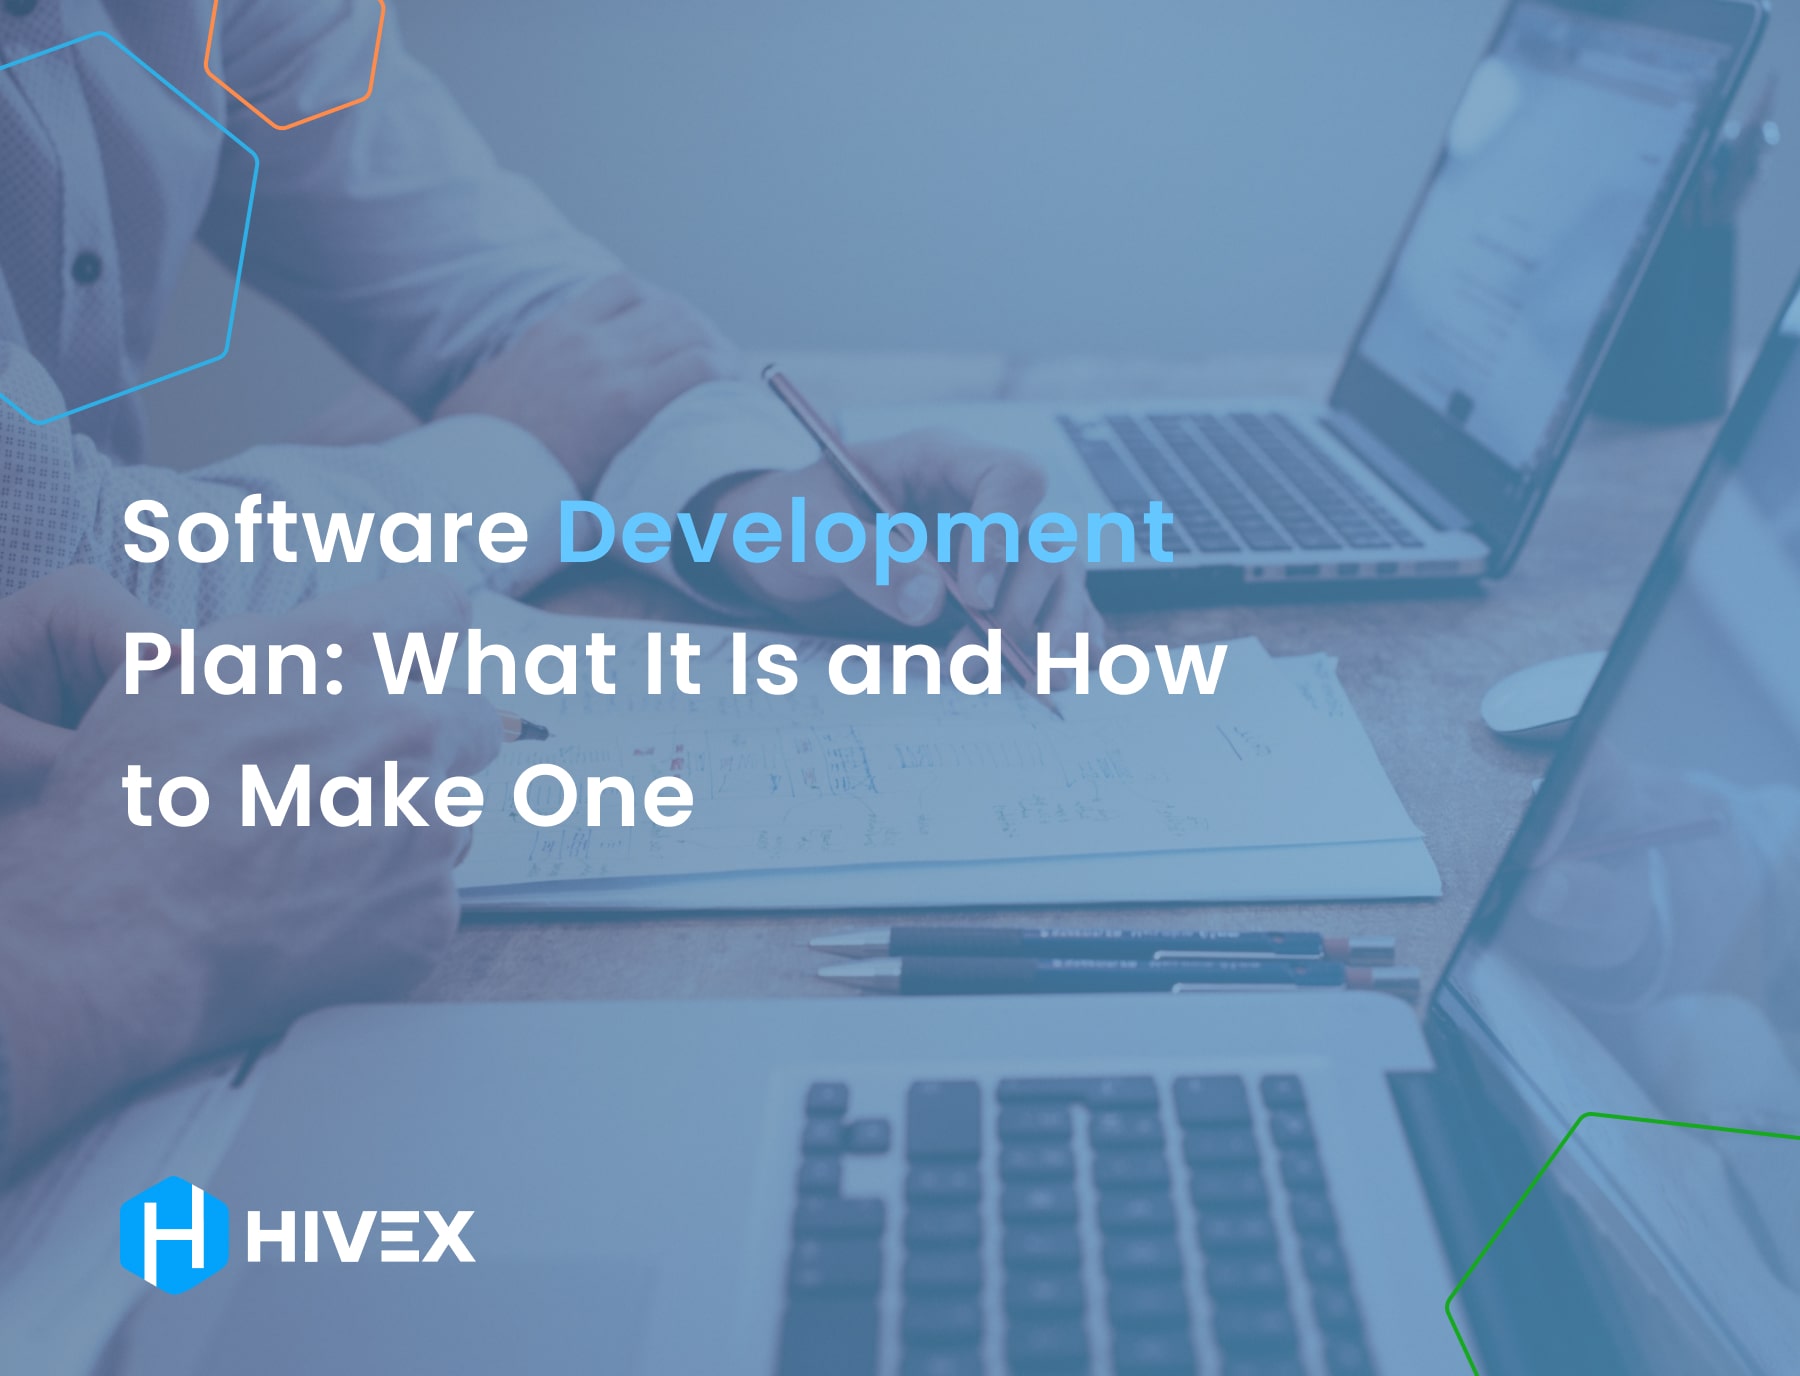 Software Development Plan: What It Is and How to Make One